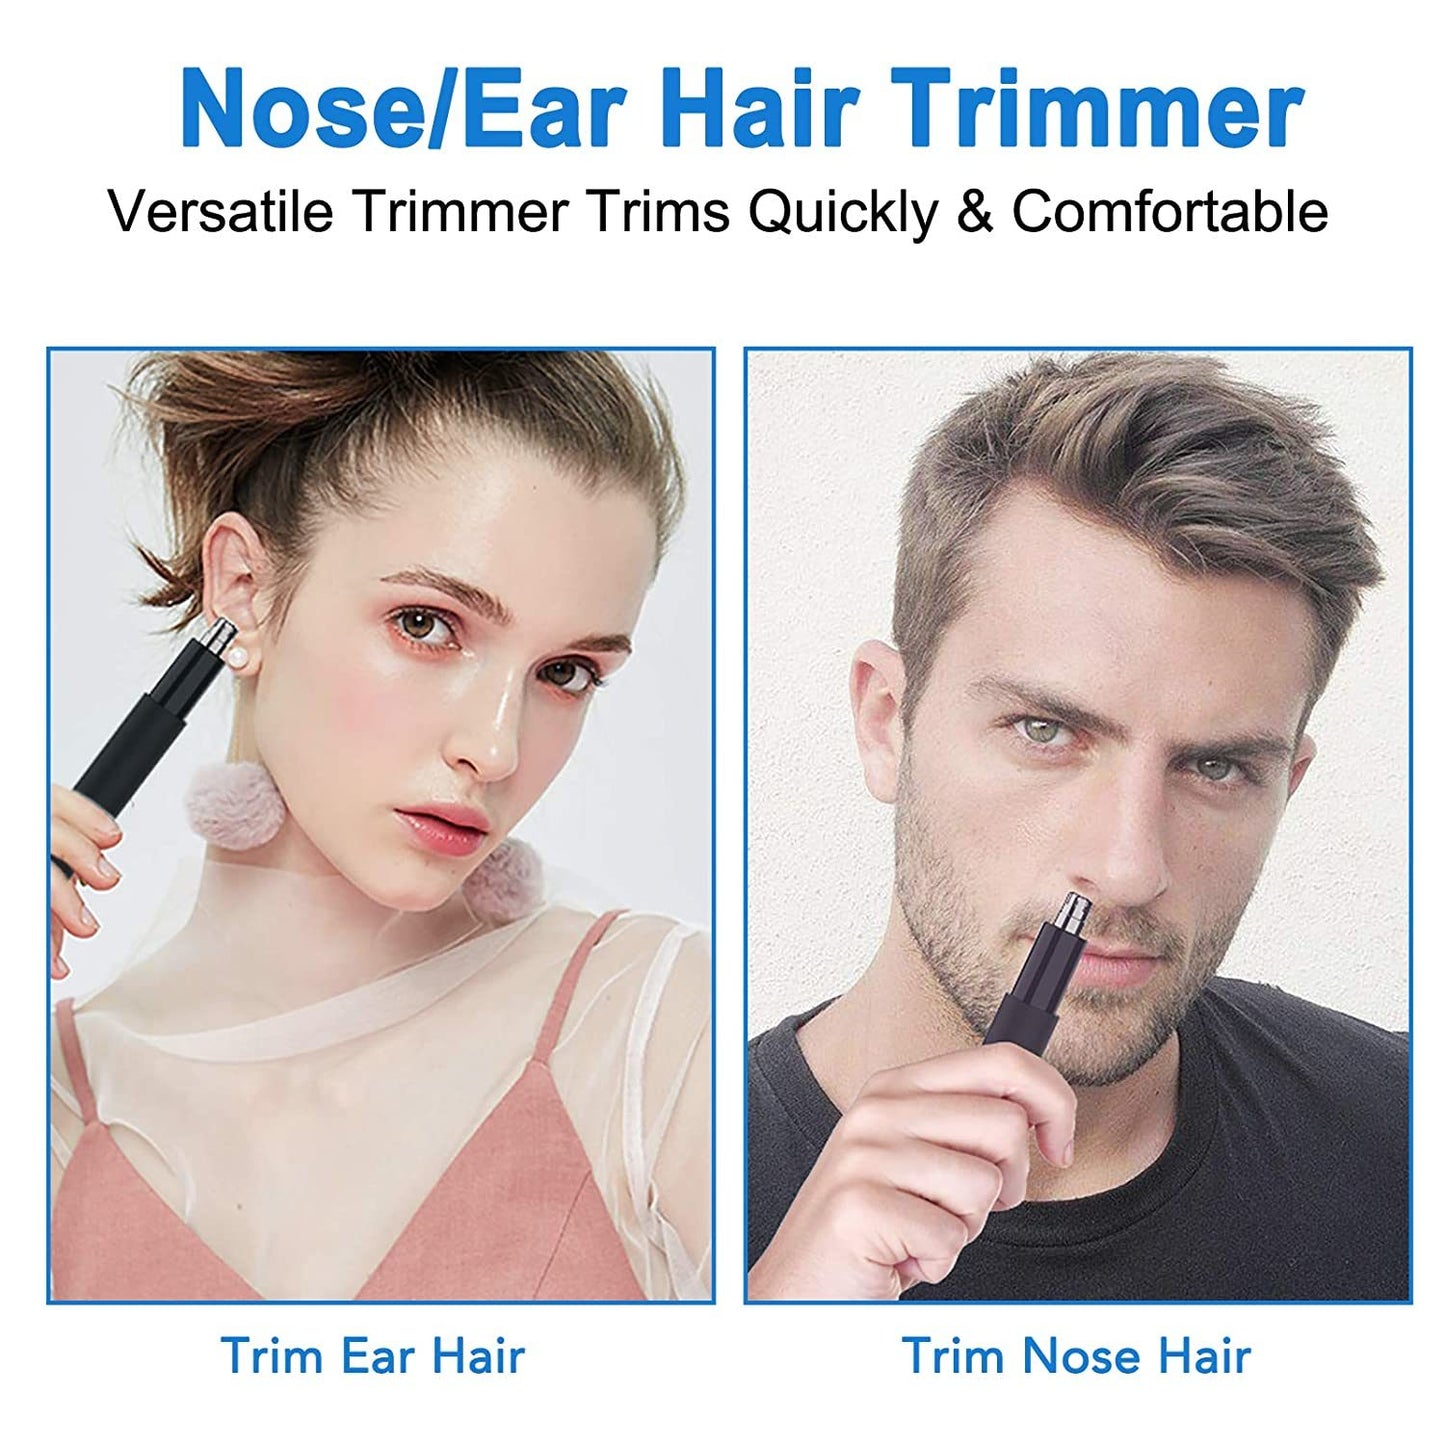 Ear and Nose Hair Trimmer for men and women-2020, Professional nose hair trimmer with Stainless Steel Blad & IPX7 Waterproof System, Facial Eyebrow and Nose Hair Remover.